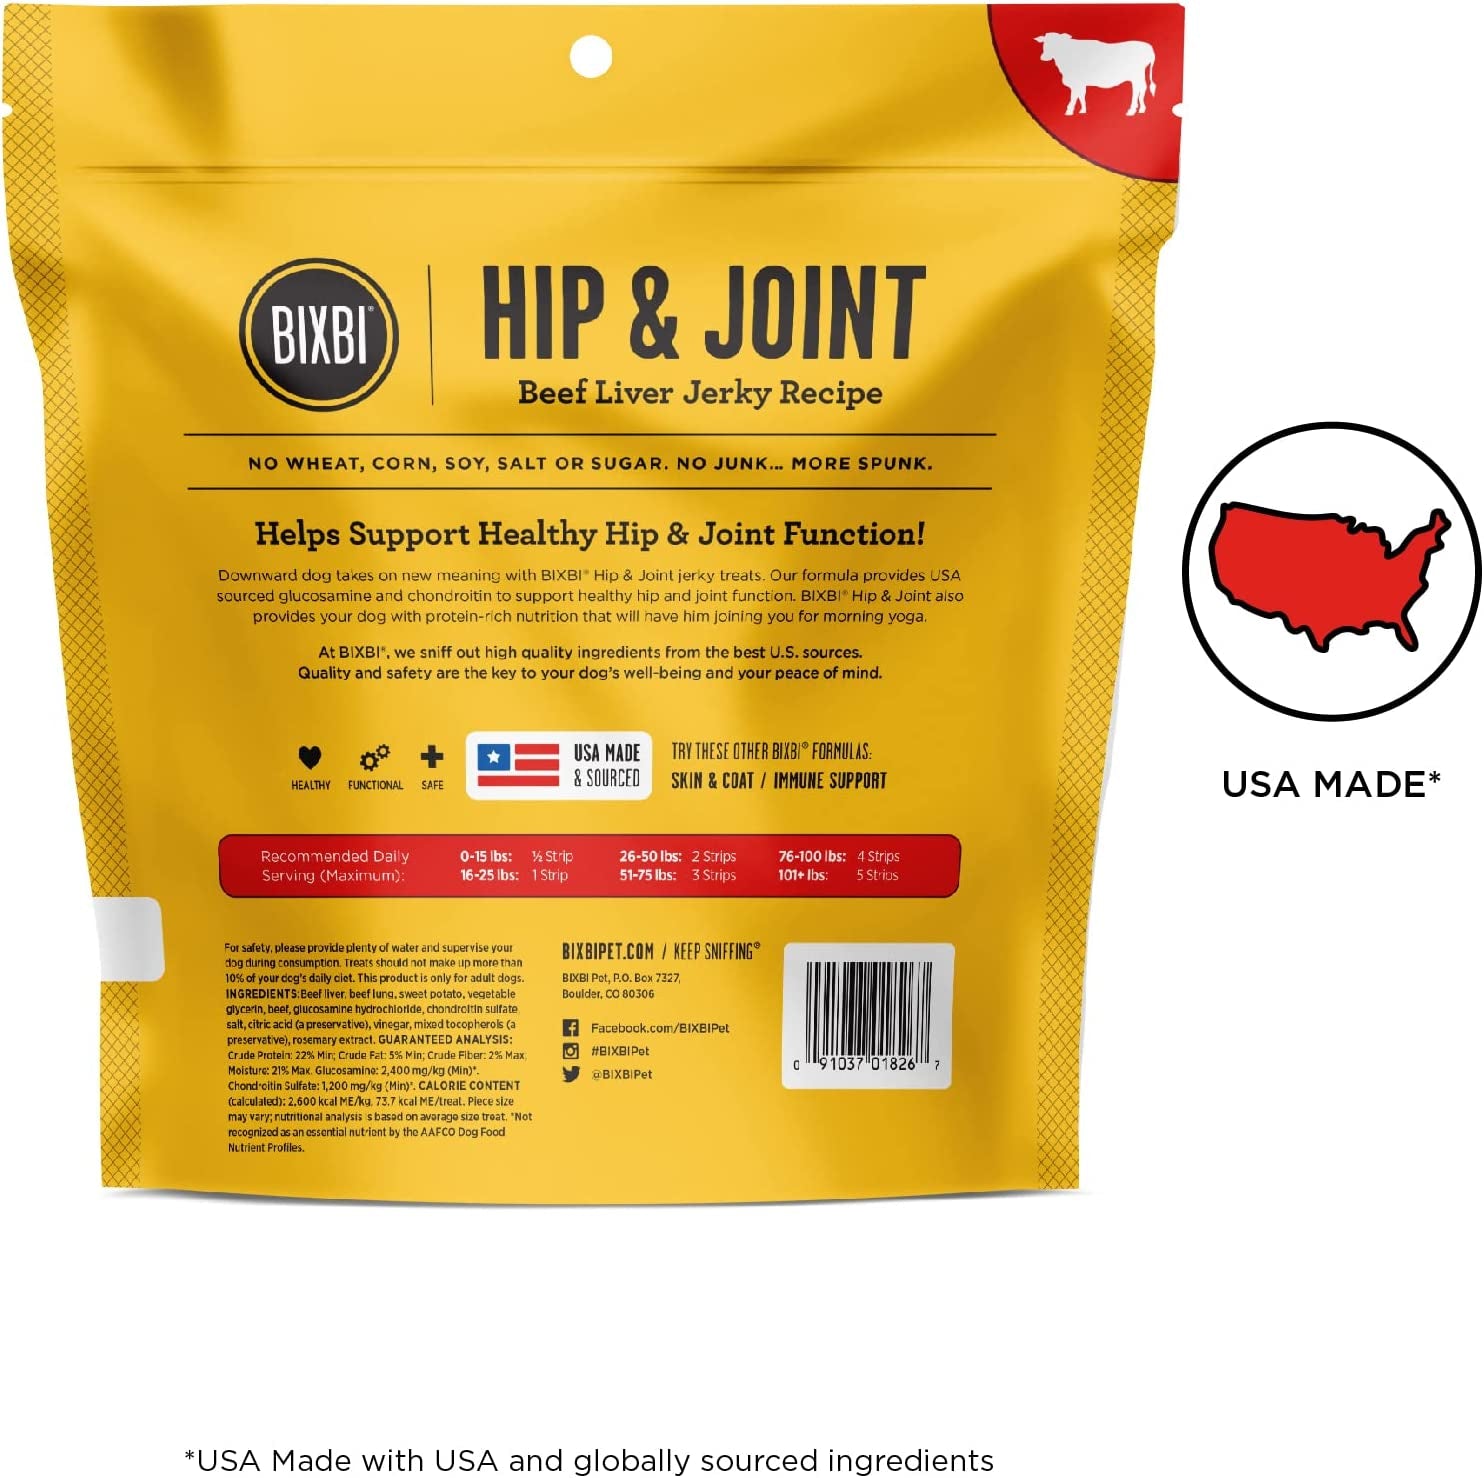 BIXBI Hip & Joint Support Beef Liver Jerky Dog Treats, 12 Oz - USA Made Grain Free Dog Treats - Glucosamine, Chondroitin for Dogs - High in Protein, Antioxidant Rich, Whole Food Nutrition, No Fillers